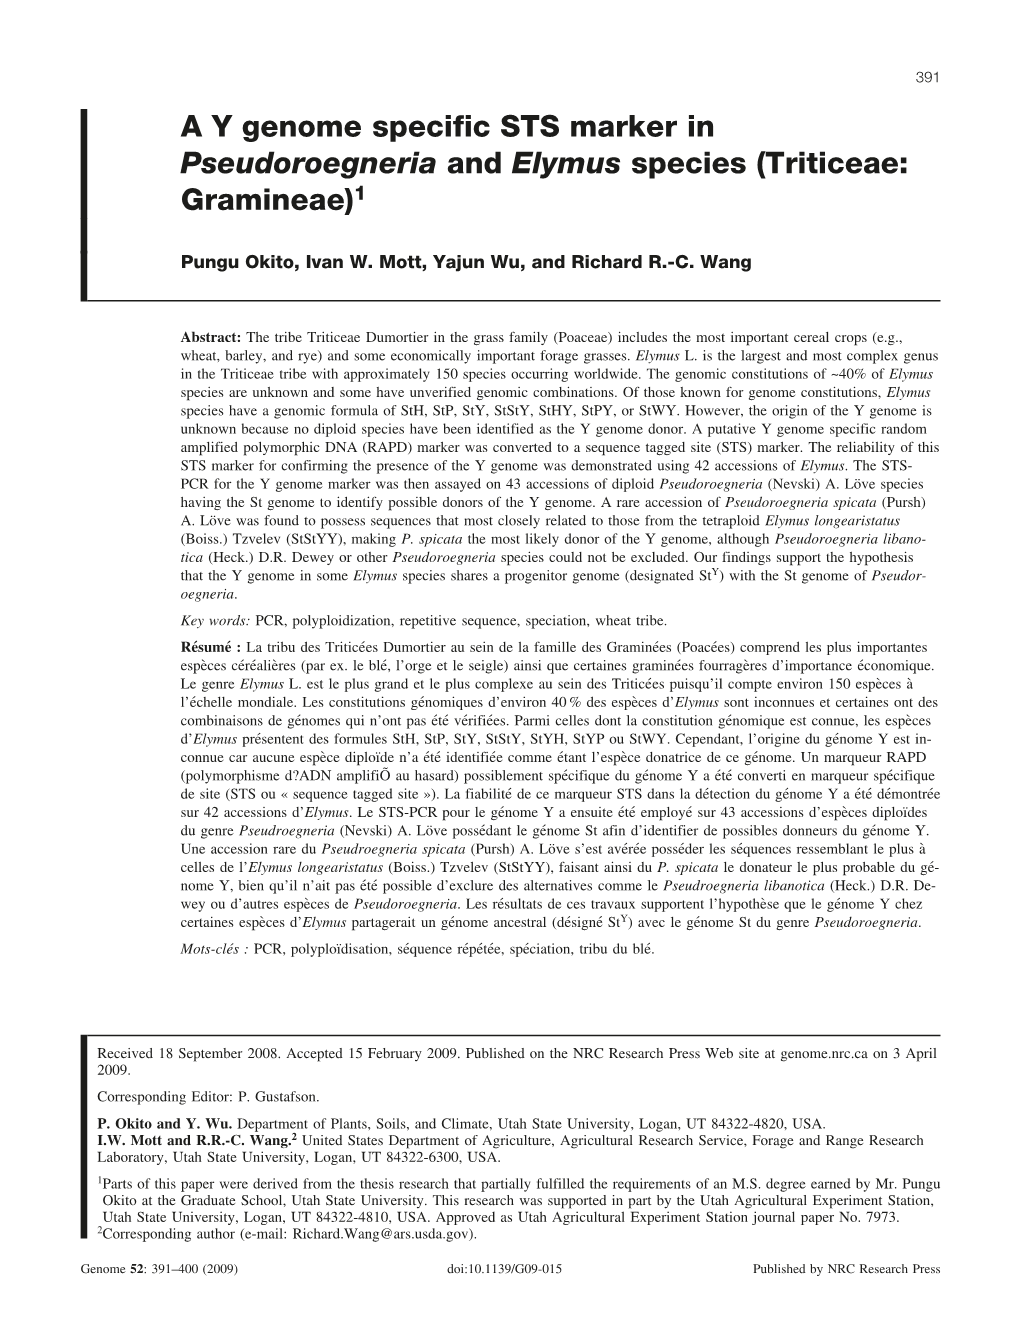 AY Genome Specific STS Marker in Pseudoroegneria and Elymus Species